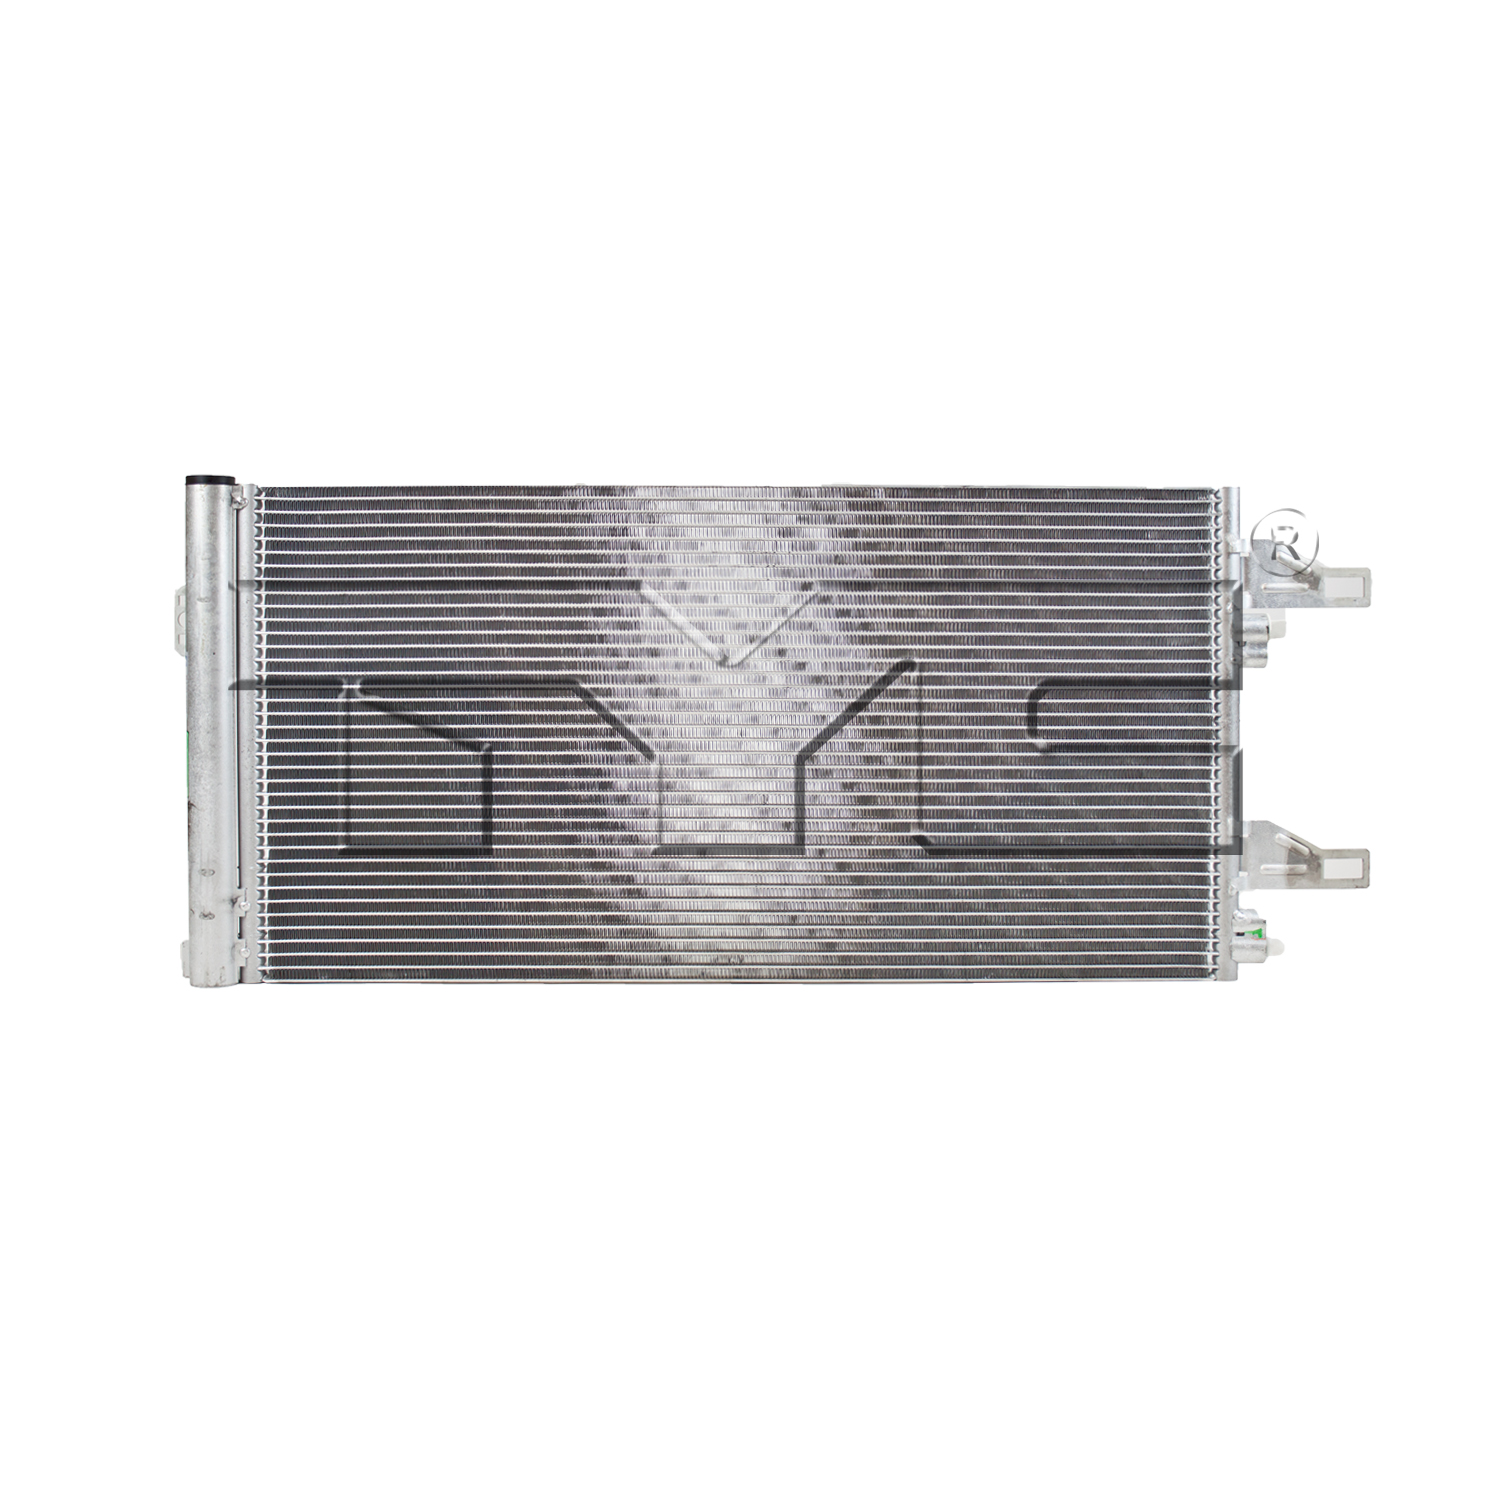 Aftermarket AC CONDENSERS for RAM - PROMASTER 1500, PROMASTER 1500,14-23,Air conditioning condenser